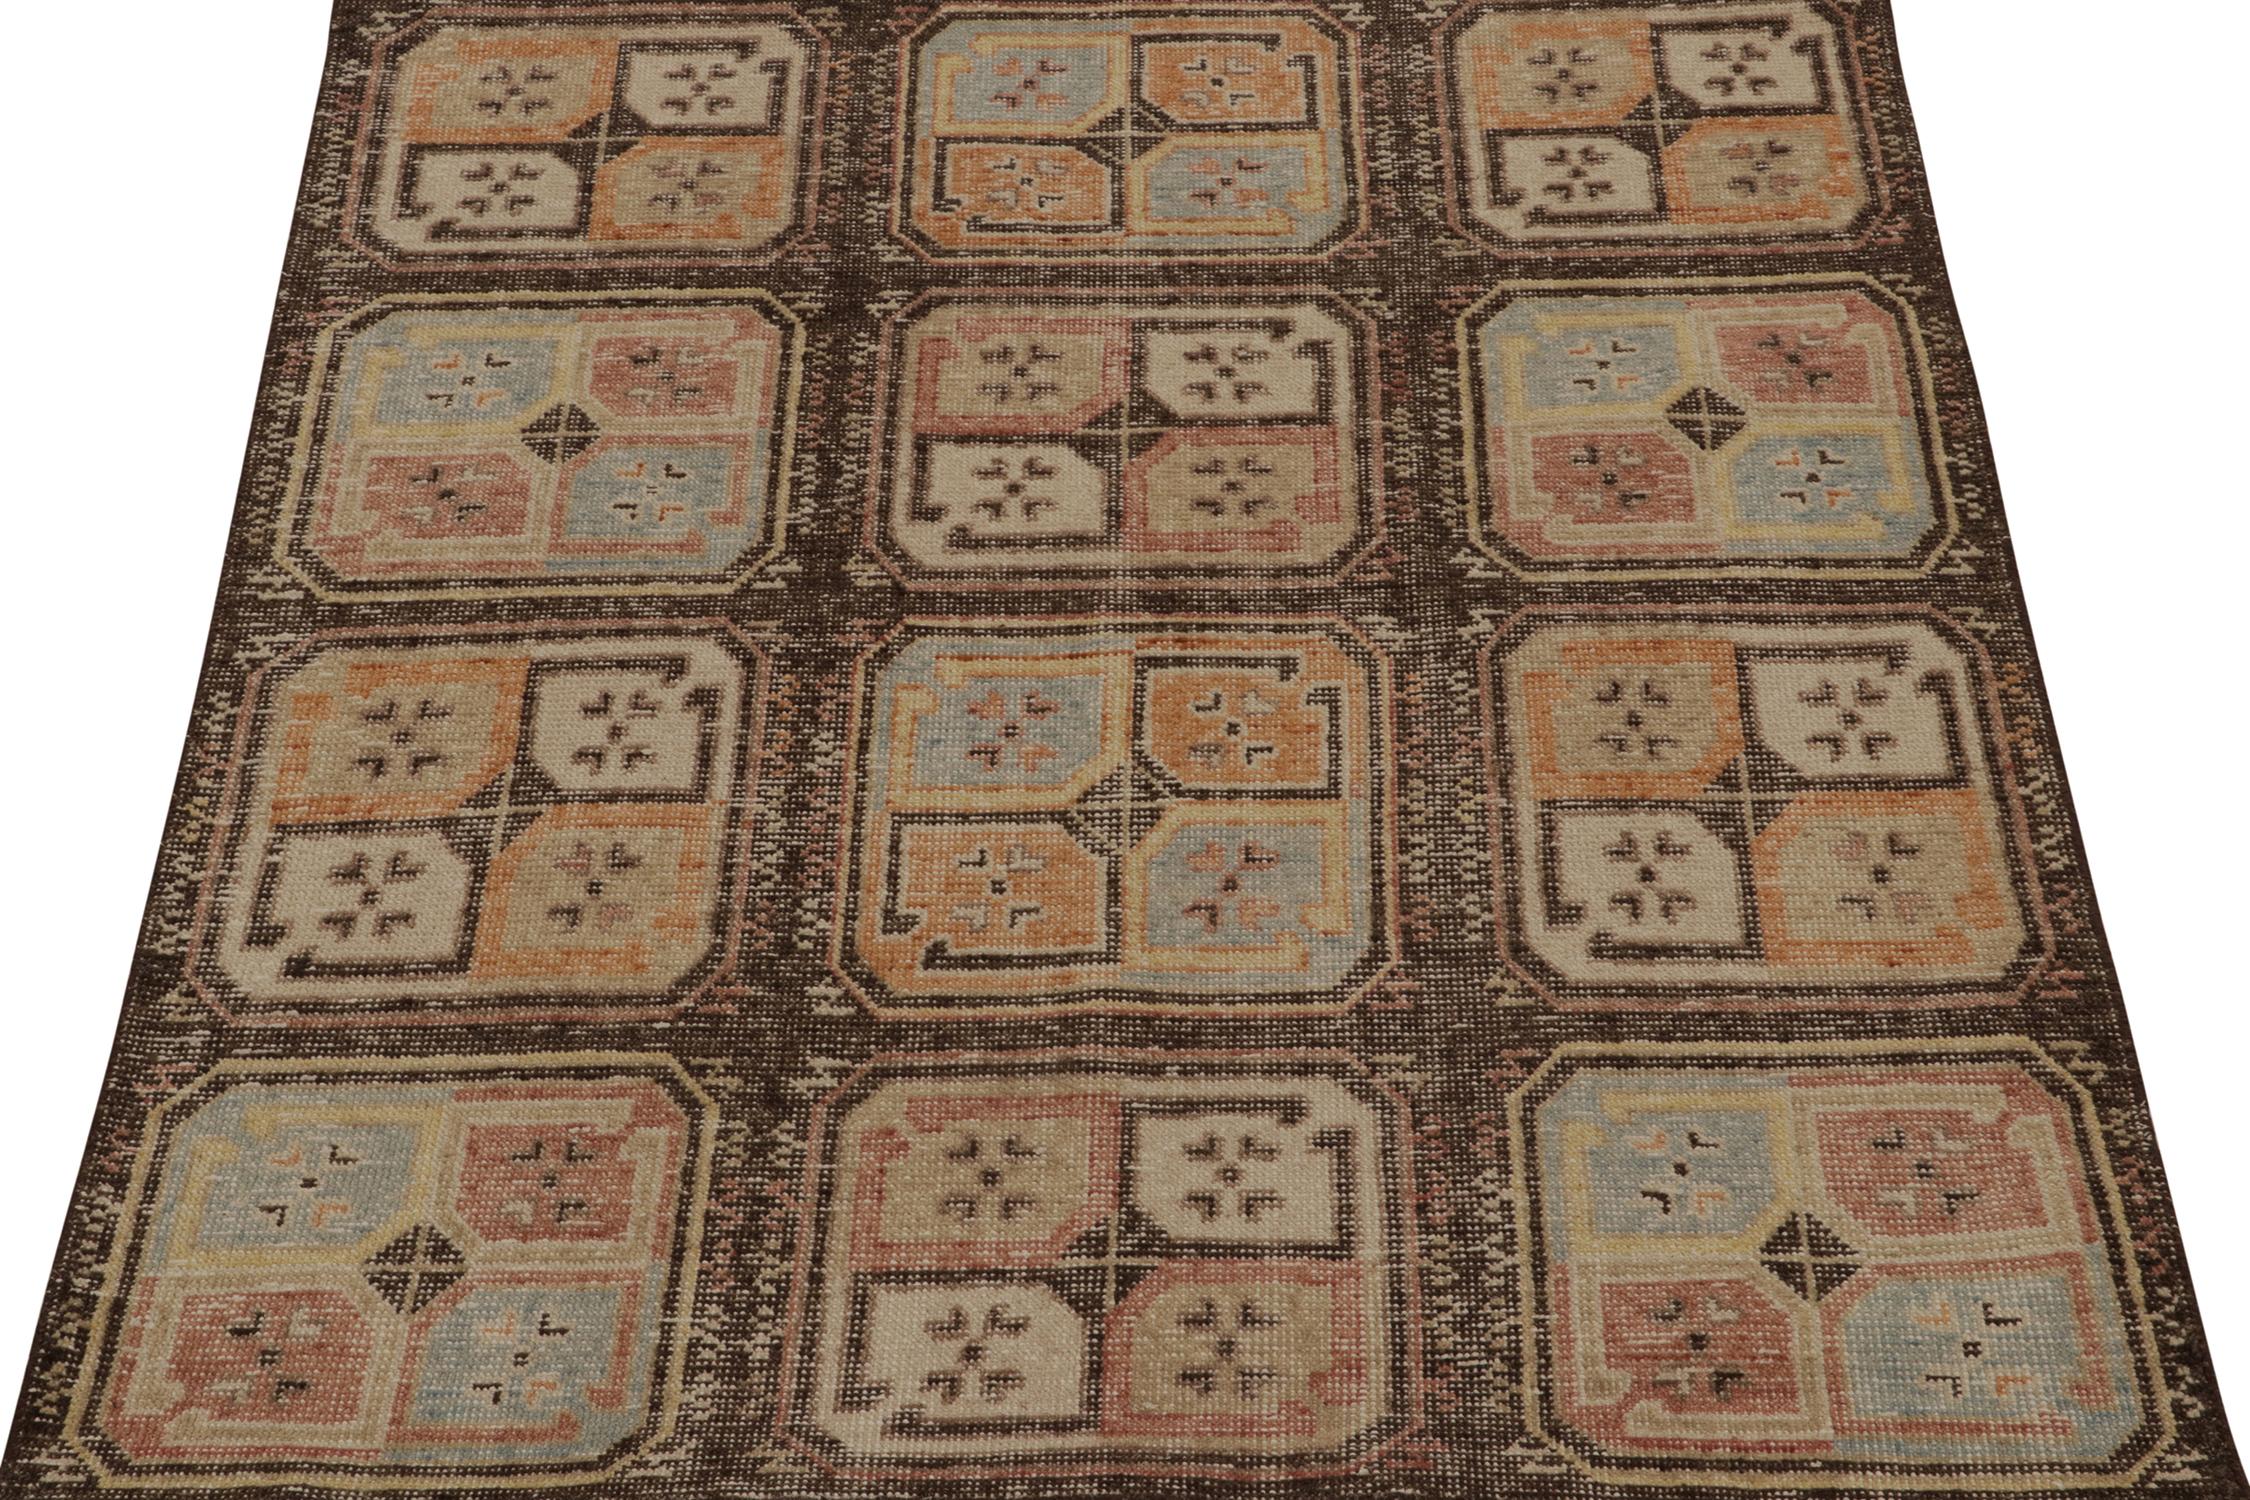 Indian Rug & Kilim’s Distressed Tribal Style Rug in Beige-Brown & Polychrome Medallions For Sale